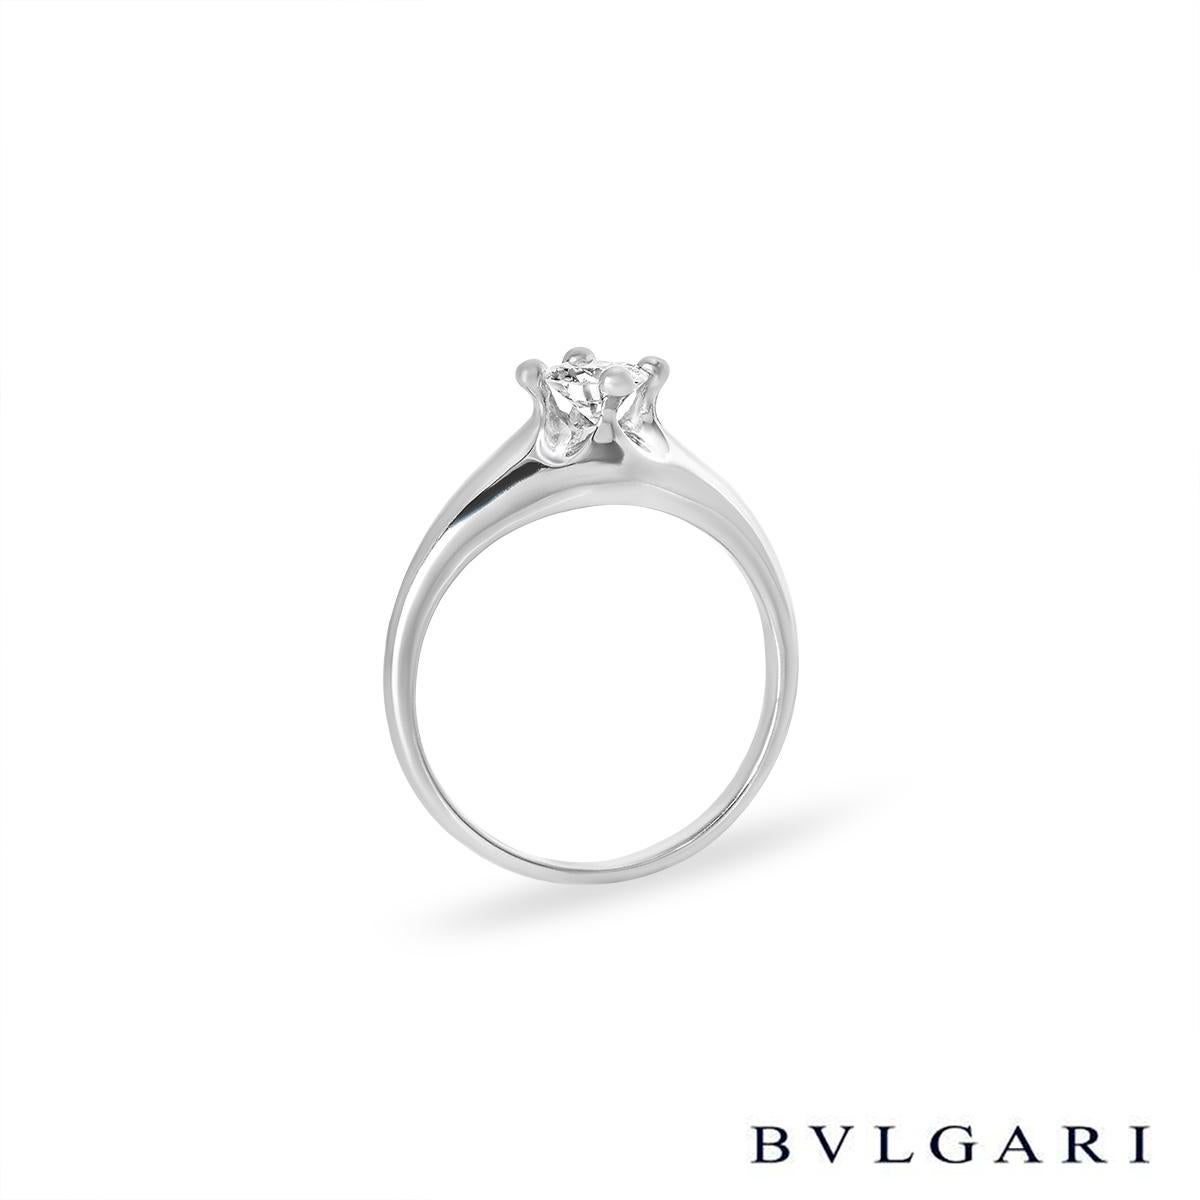 A stunning diamond single stone ring in platinum by Bvlgari. The ring is set to the centre with an approximately 0.35ct round brilliant cut diamond in a raised four claw compass setting, G in colour and VVS2 in clarity. The tapered 6mm ring is